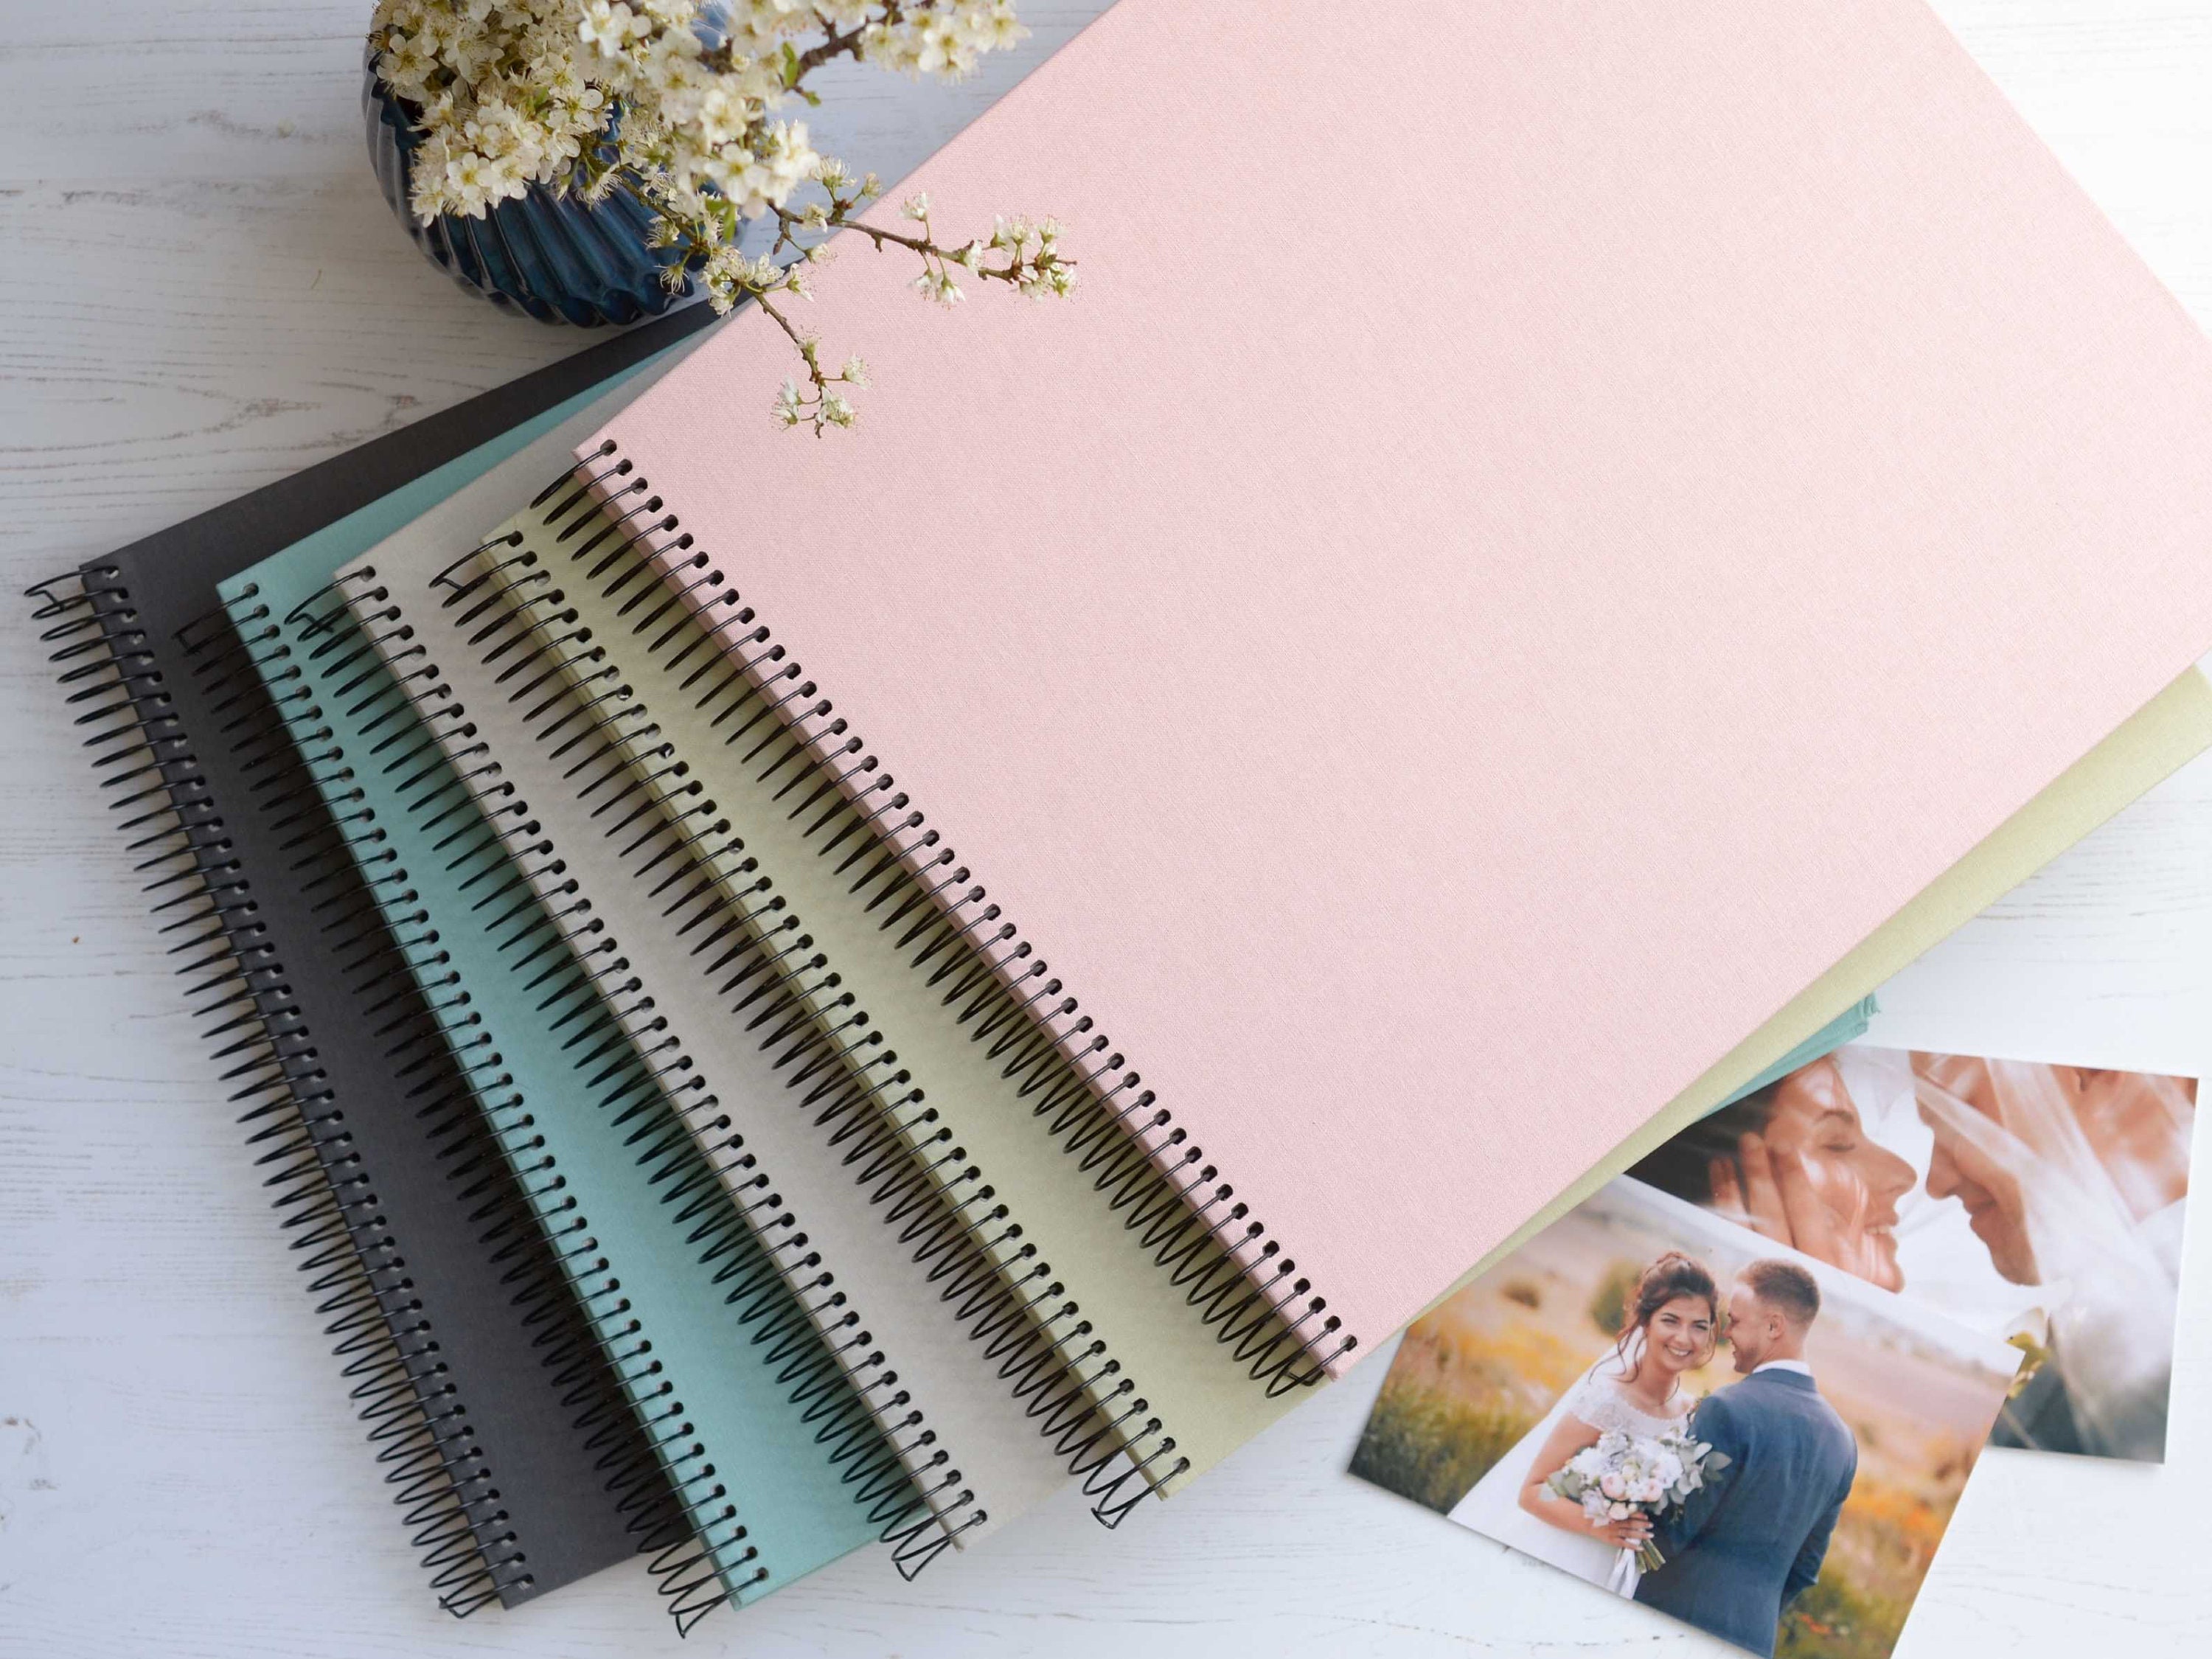 Extra Large Traditional Book Bound Photograph Album With Opaque Glassine  Interleaves. Blank DIY Plain White Photo Album 50 Pages / 100 Sides 